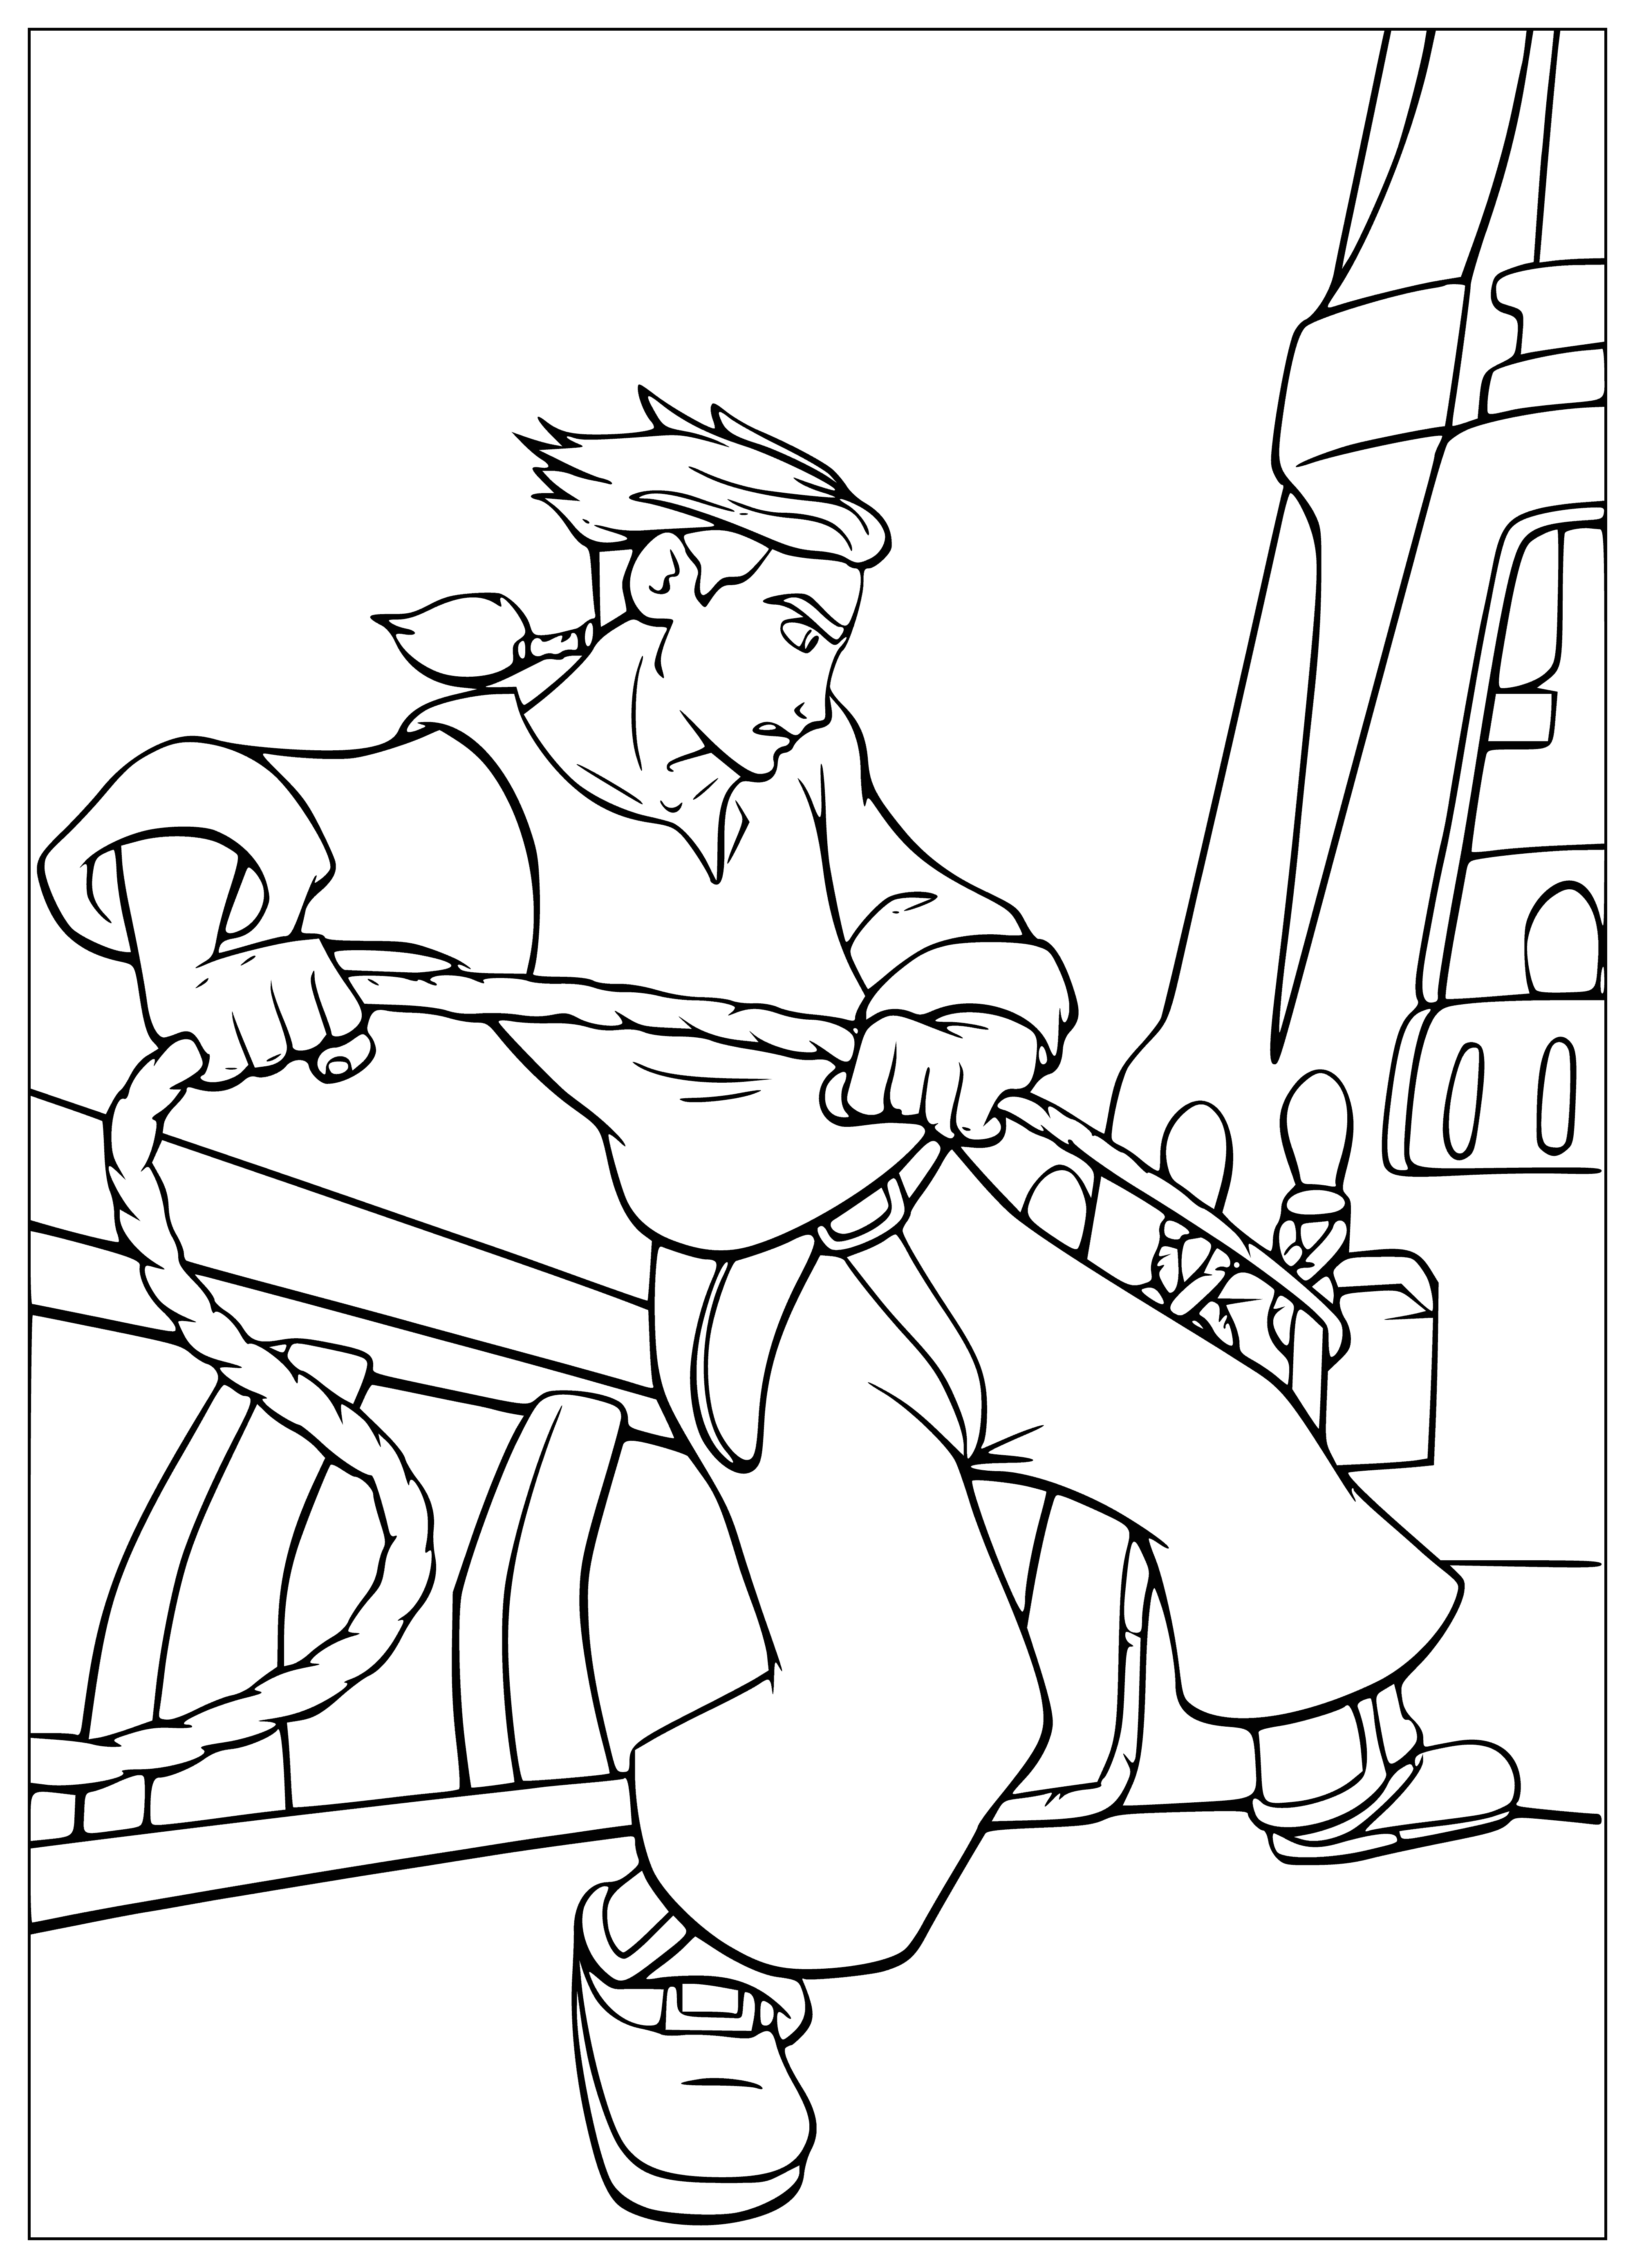 Jimm tightens the knot coloring page